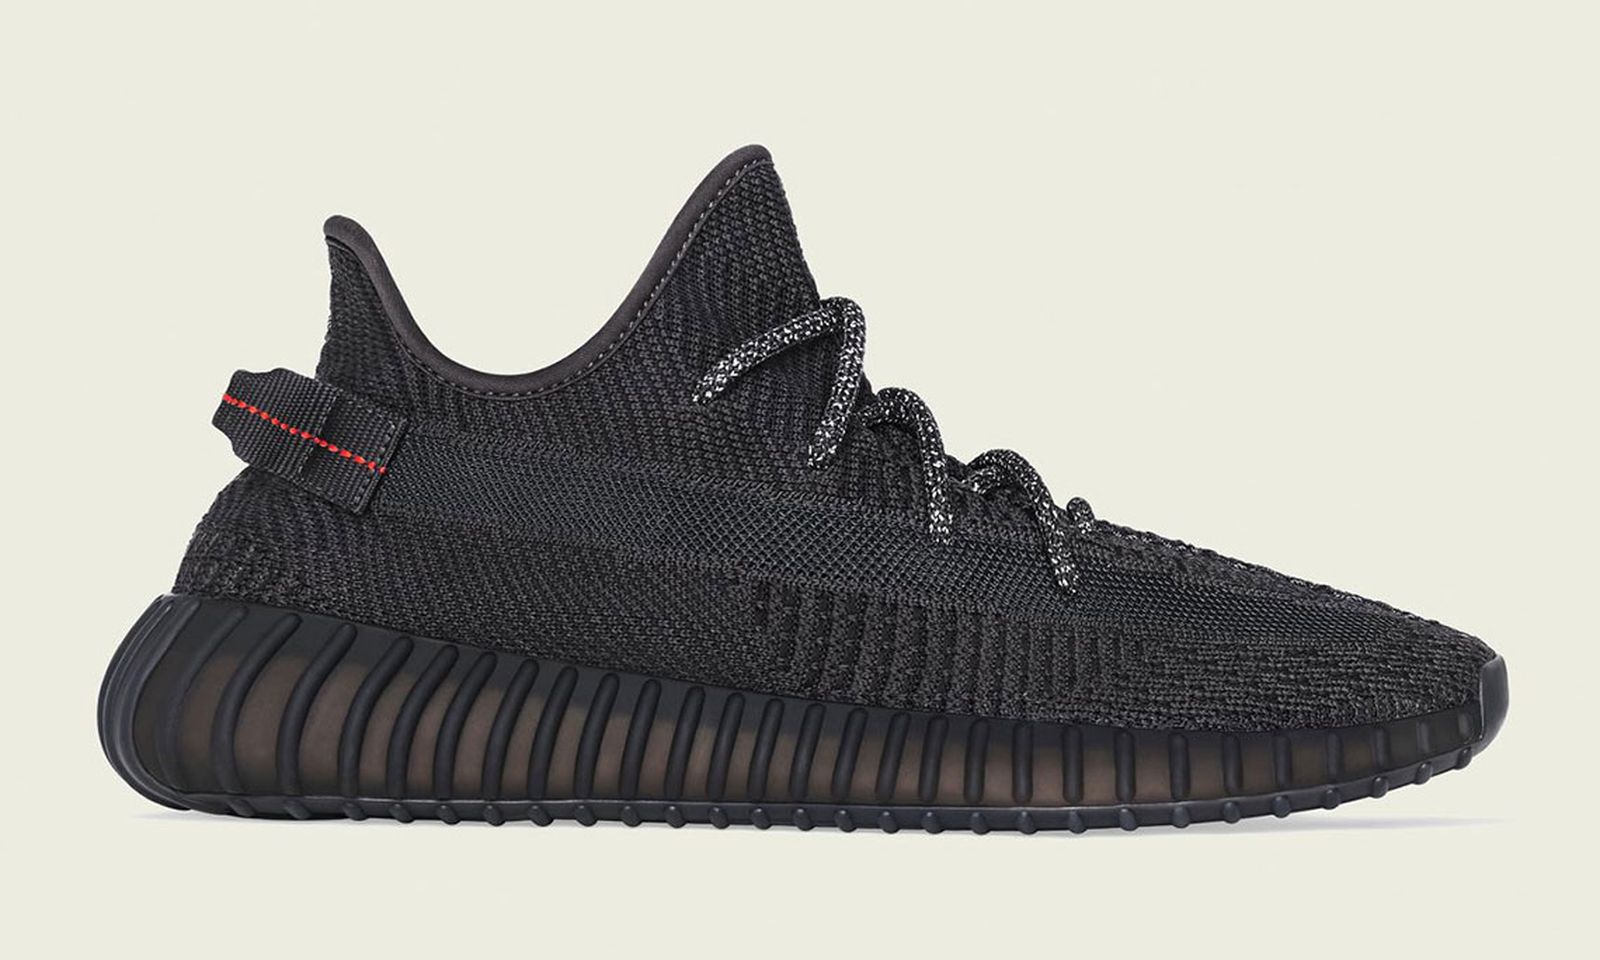 adidas originals yeezy boost 350 v2 black release date price feature StockX adidas yeezy boost 350 v2